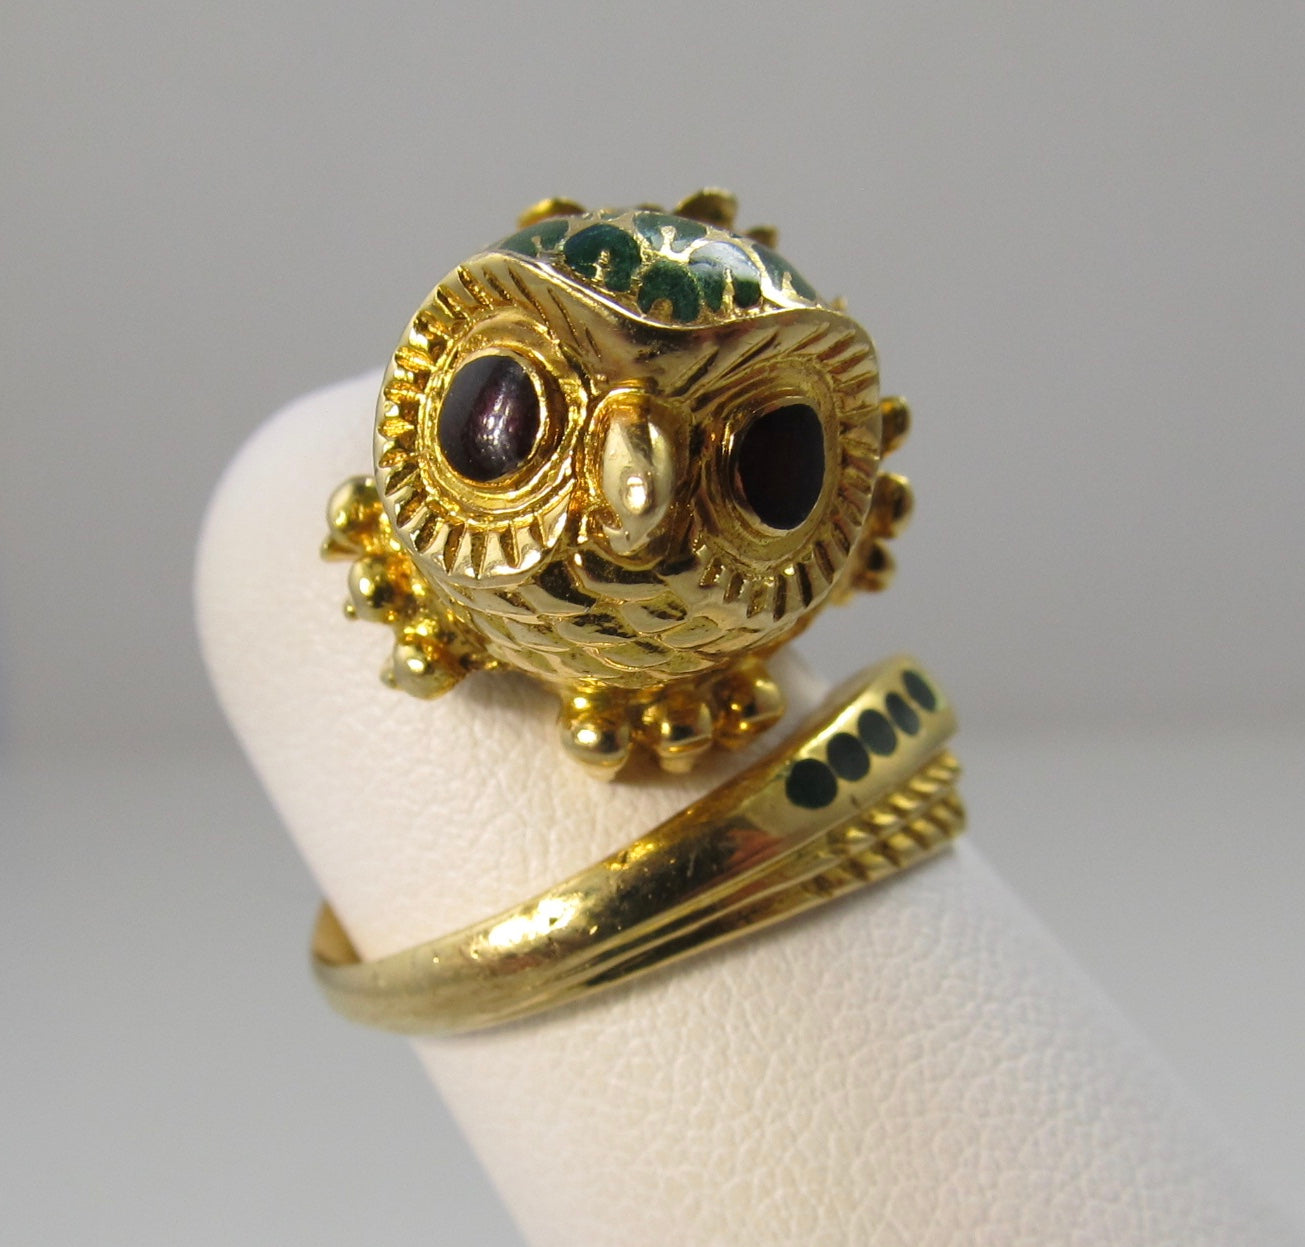 Love!  Vintage owl ring, 18k yellow gold with enamel